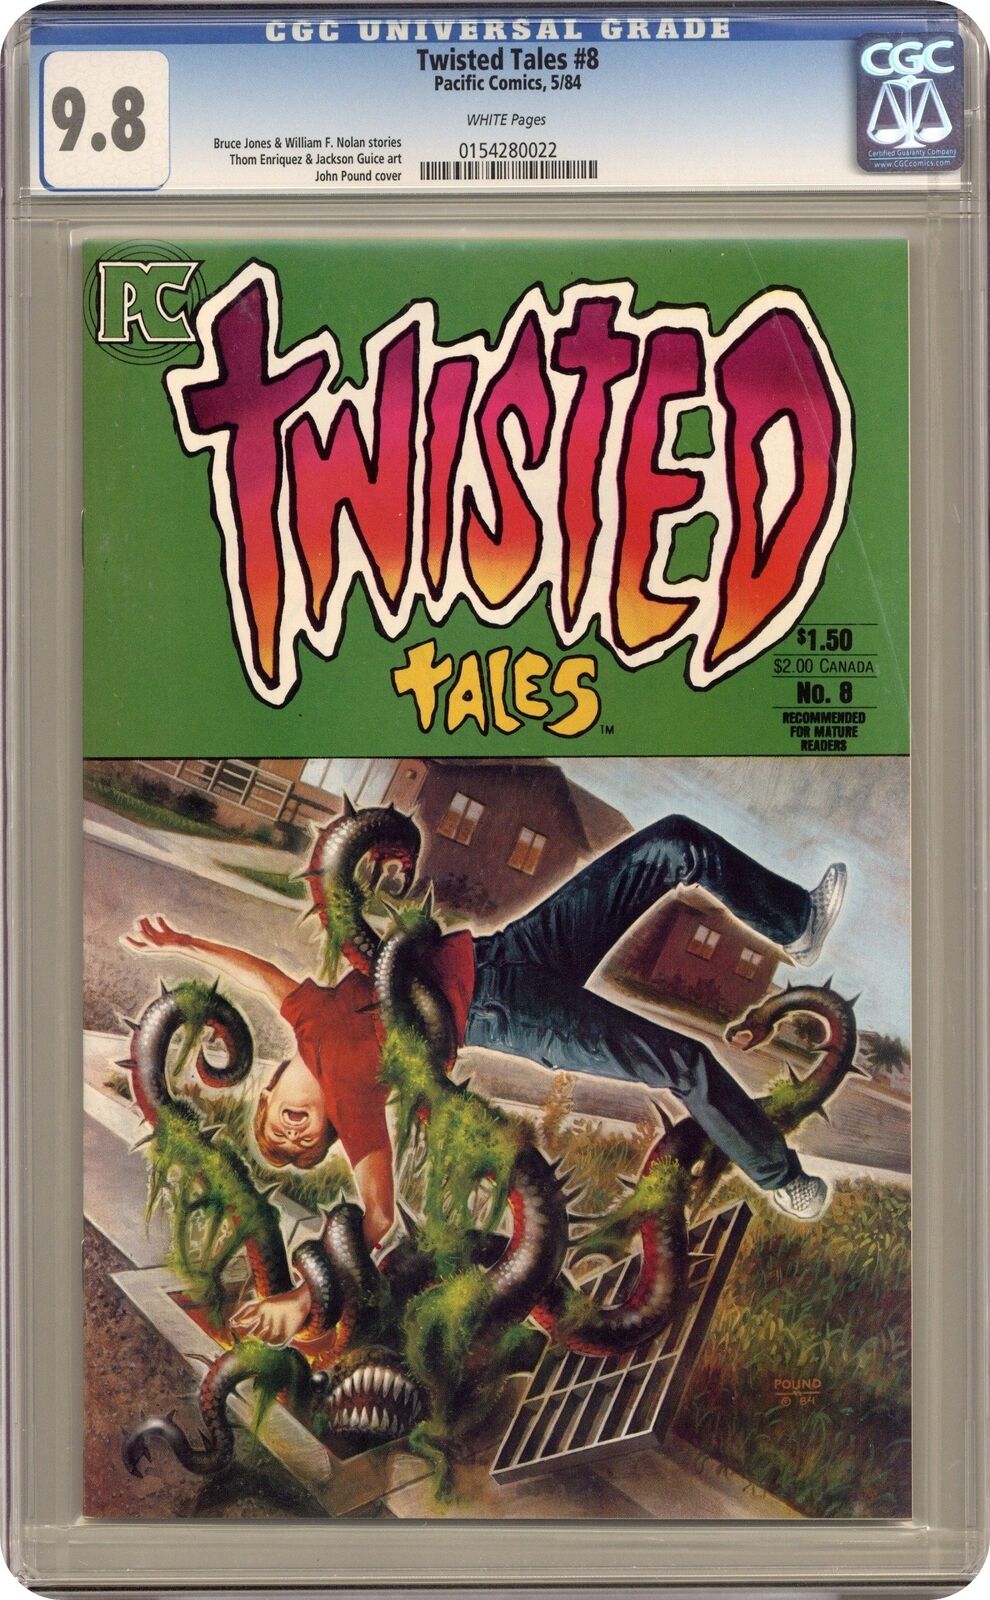 Twisted Tales #8 CGC 9.8 1984 0154280022